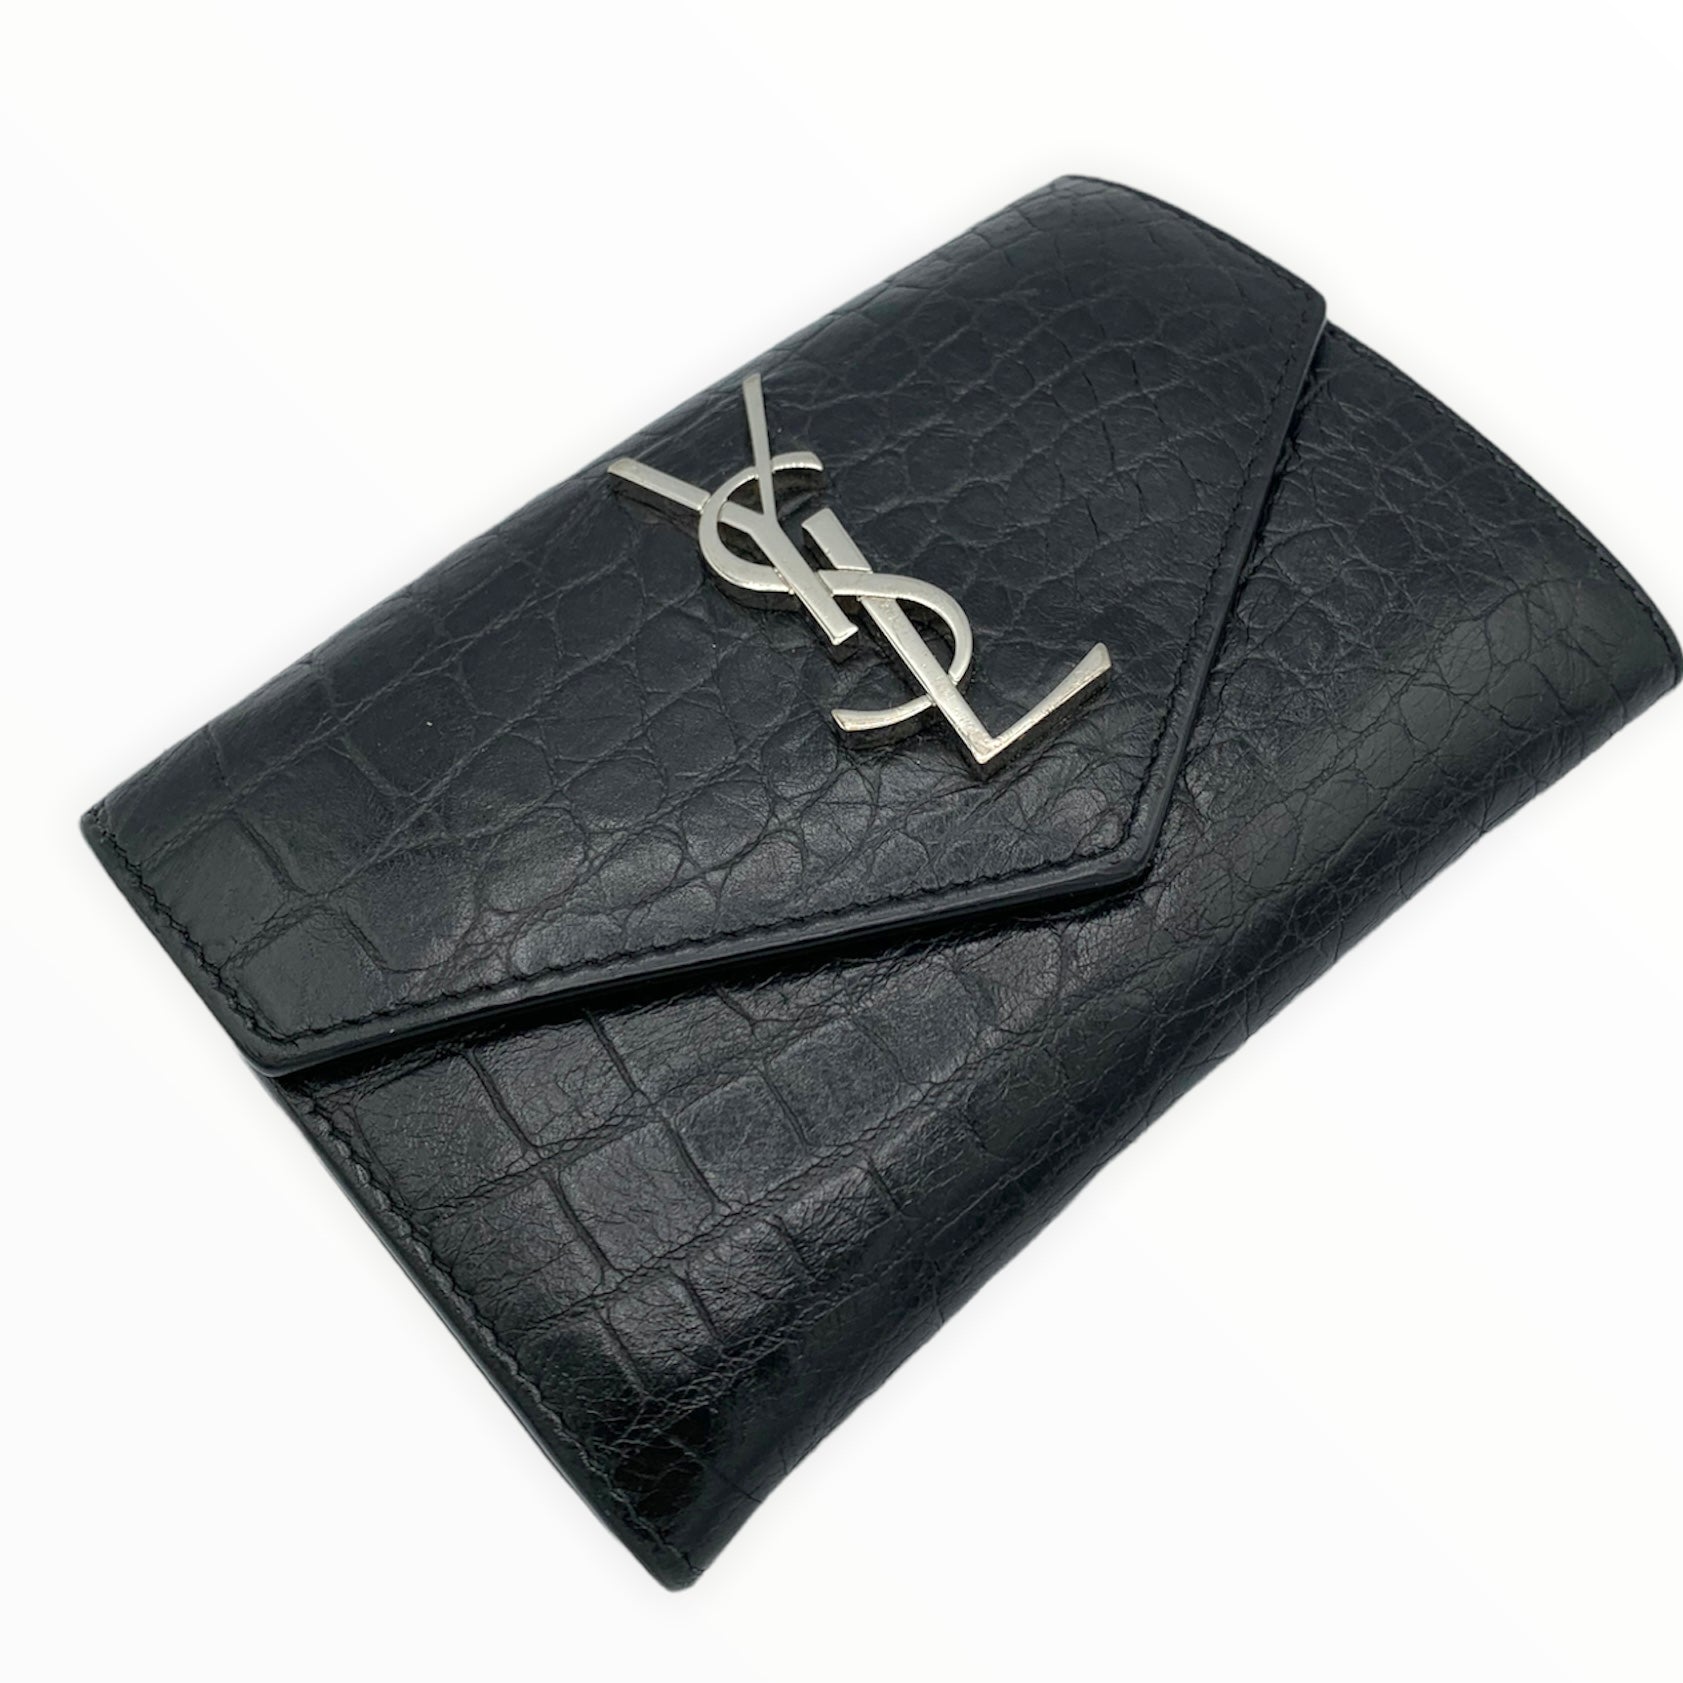 Saint Laurent Small Monogram Quilted Leather Wallet